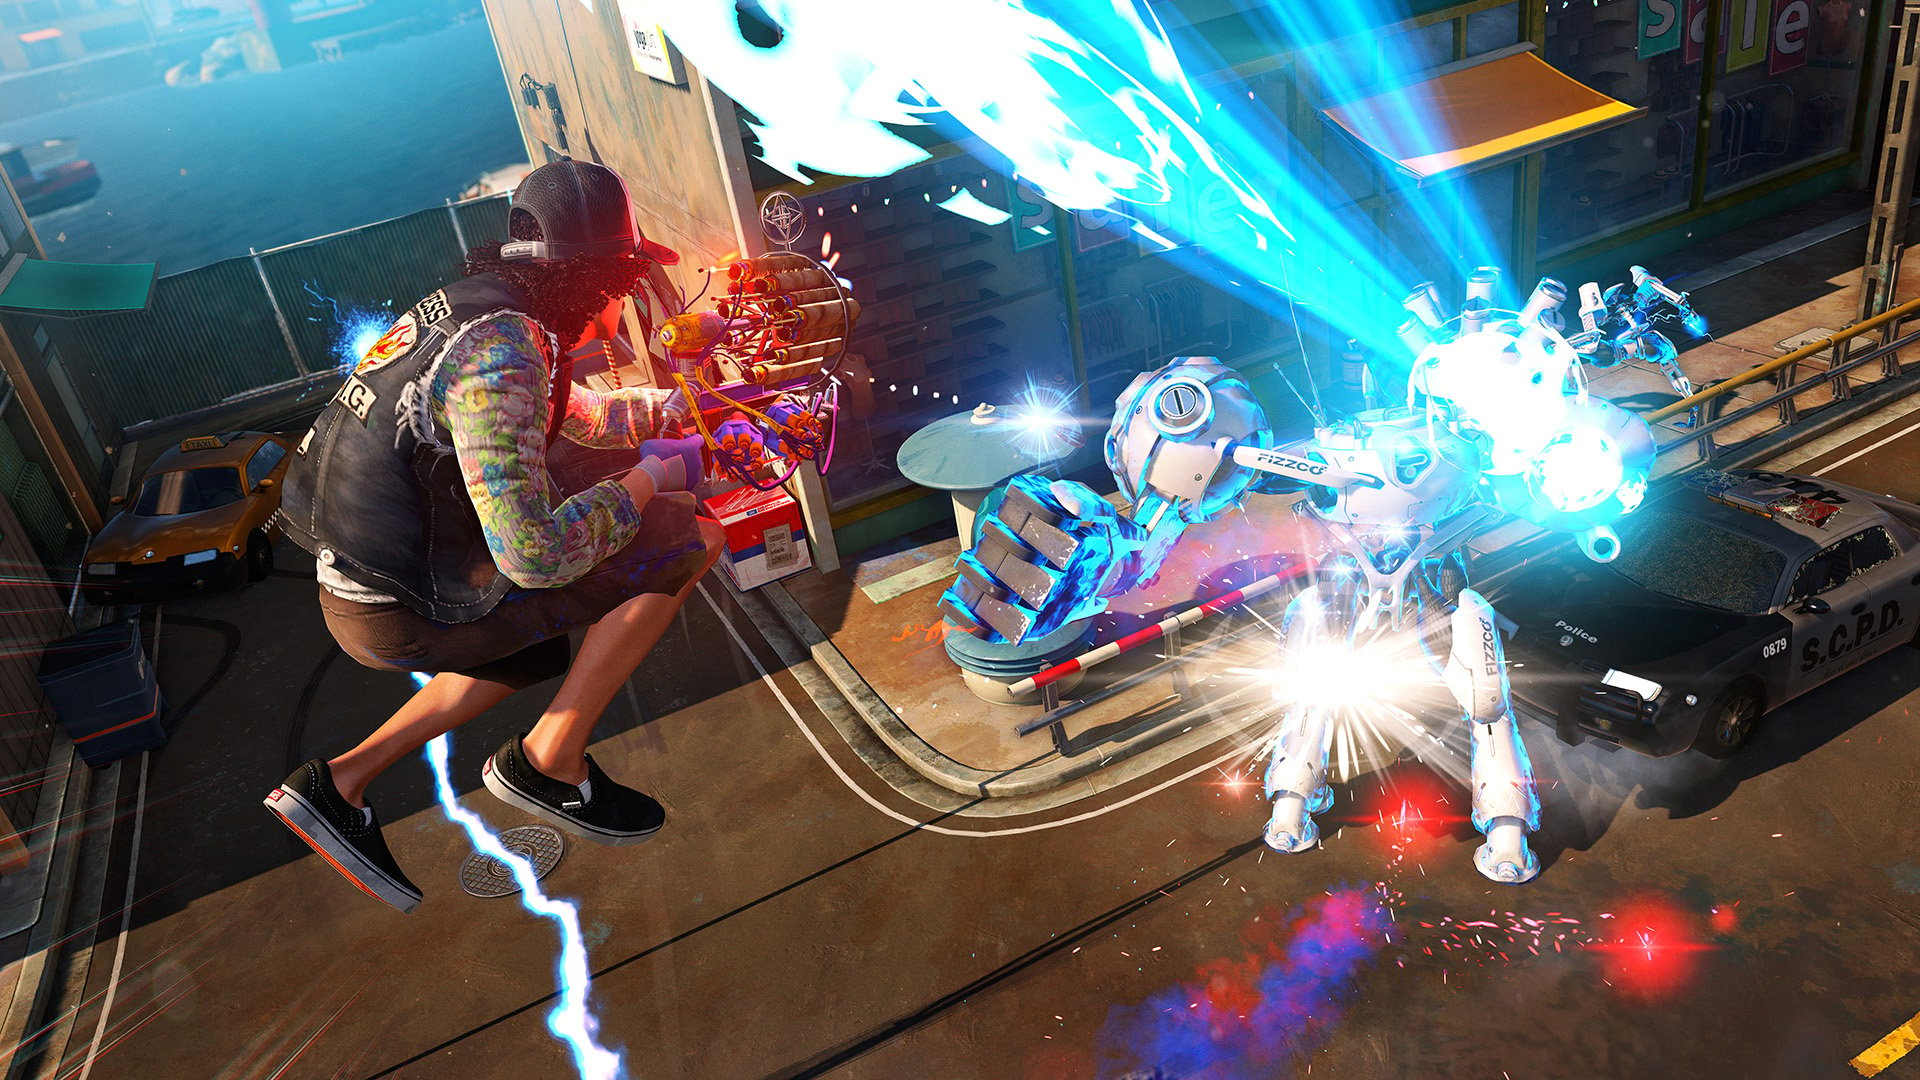 First Sunset Overdrive trailer shows new Xbox One exclusive